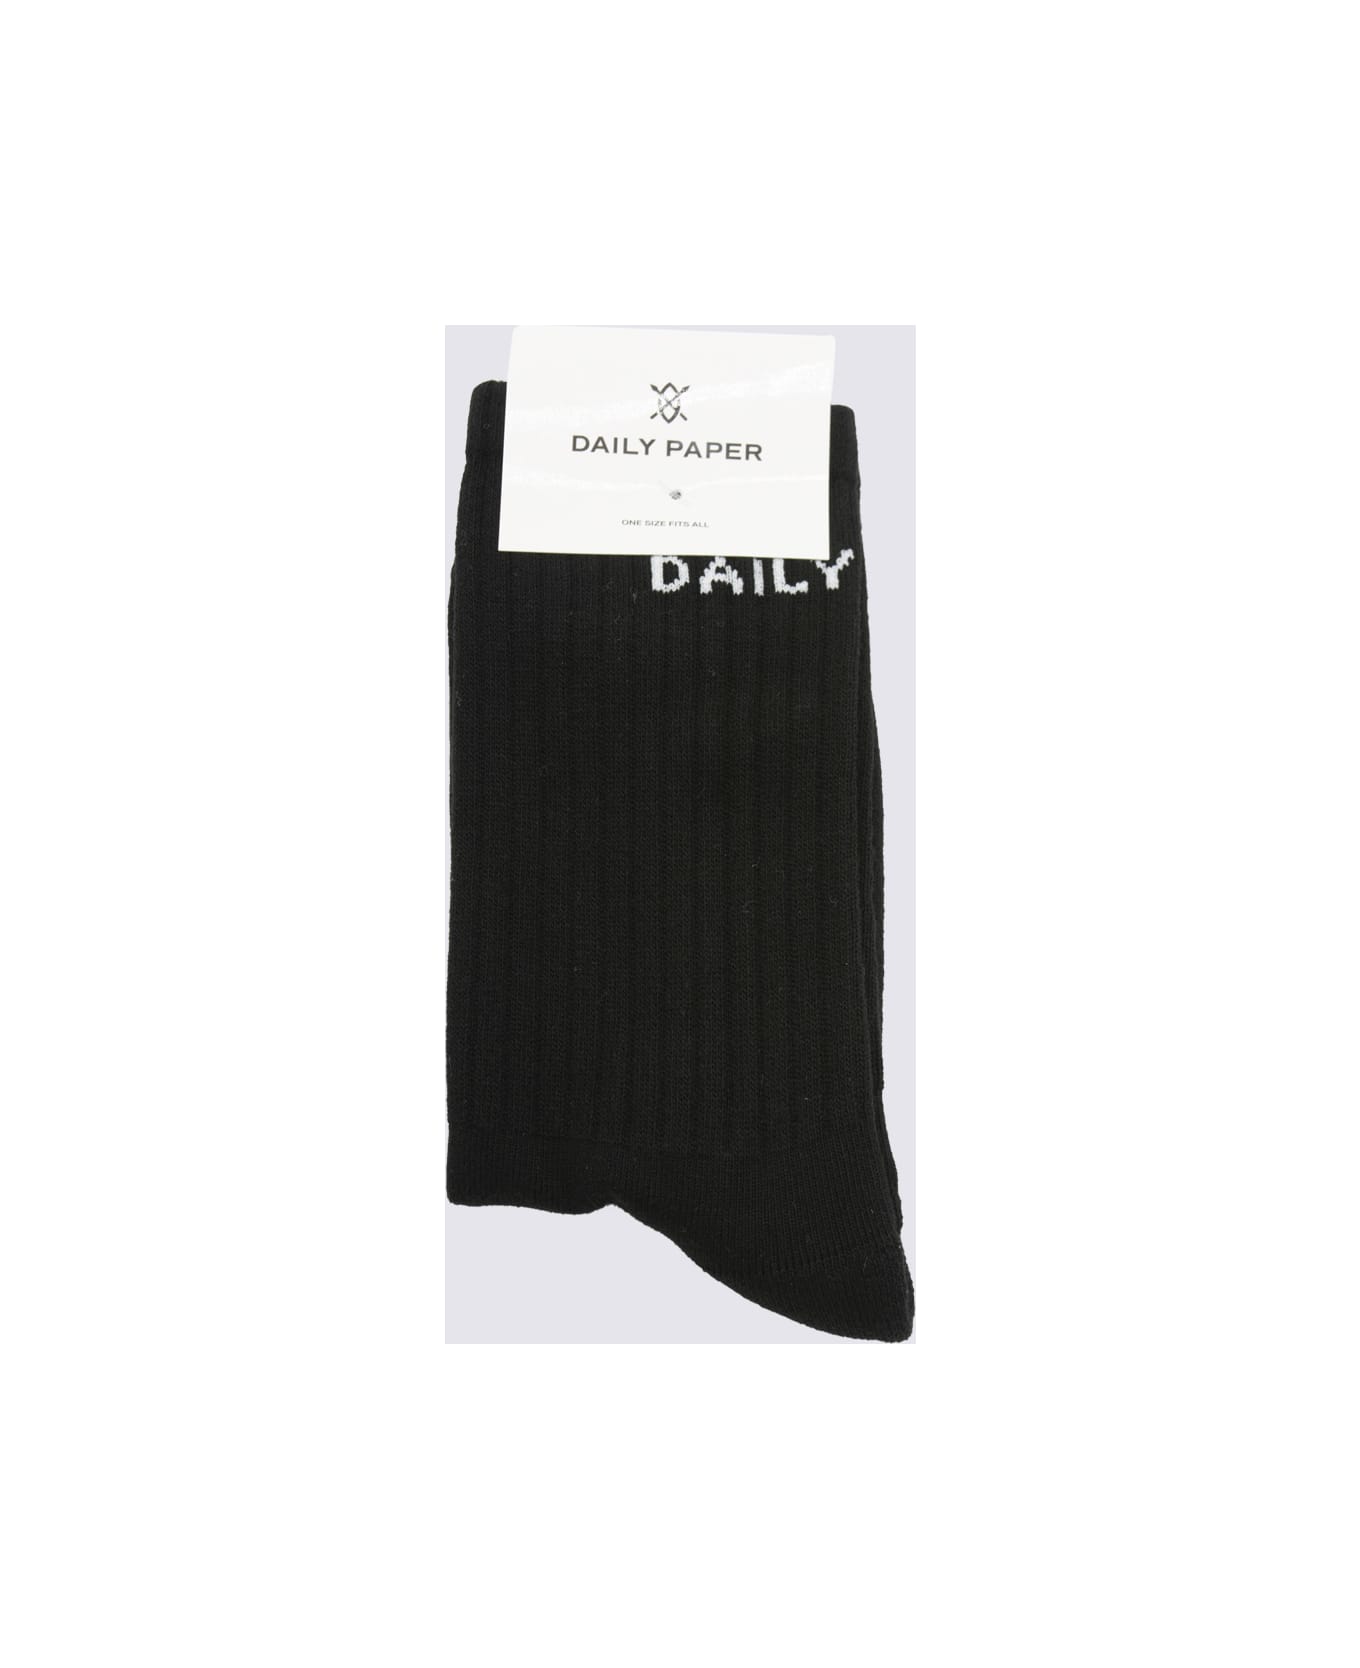 Daily Paper Black And White Cotton Blend Socks - Black 靴下